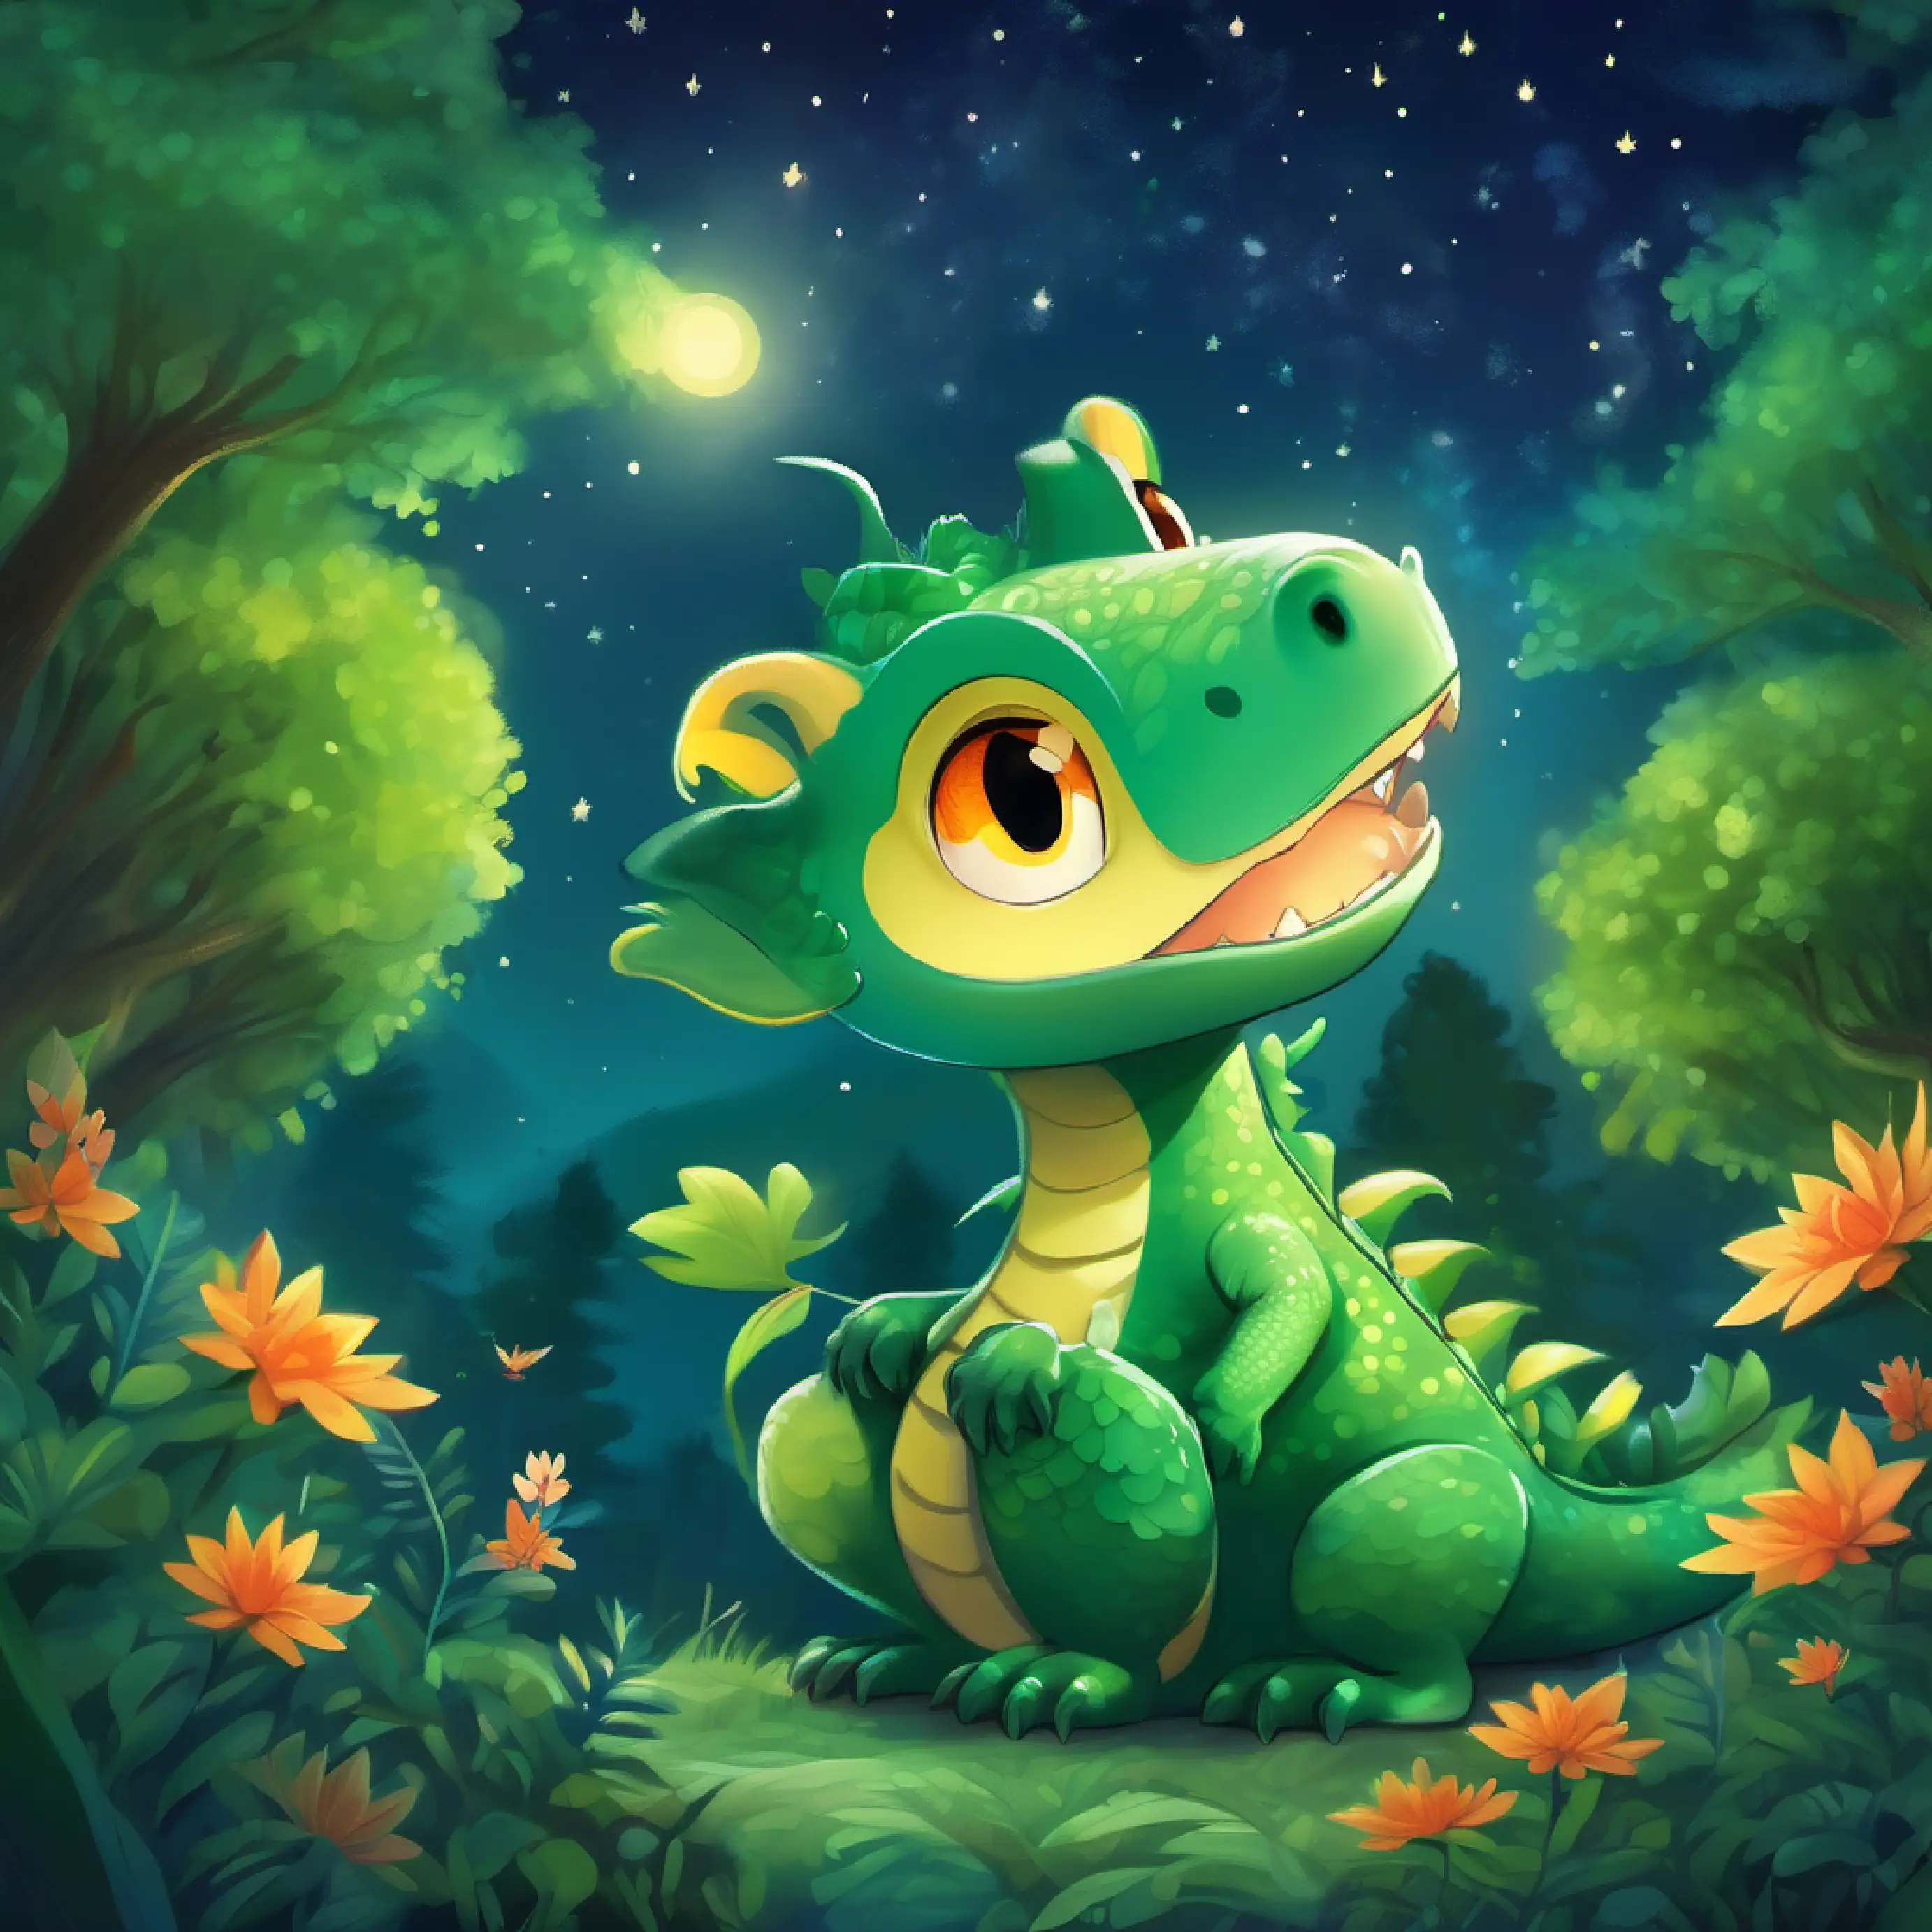 The forest creatures thank A little green dragon with curious eyes and a friendly smile, who returns home under the starry sky feeling warm inside.